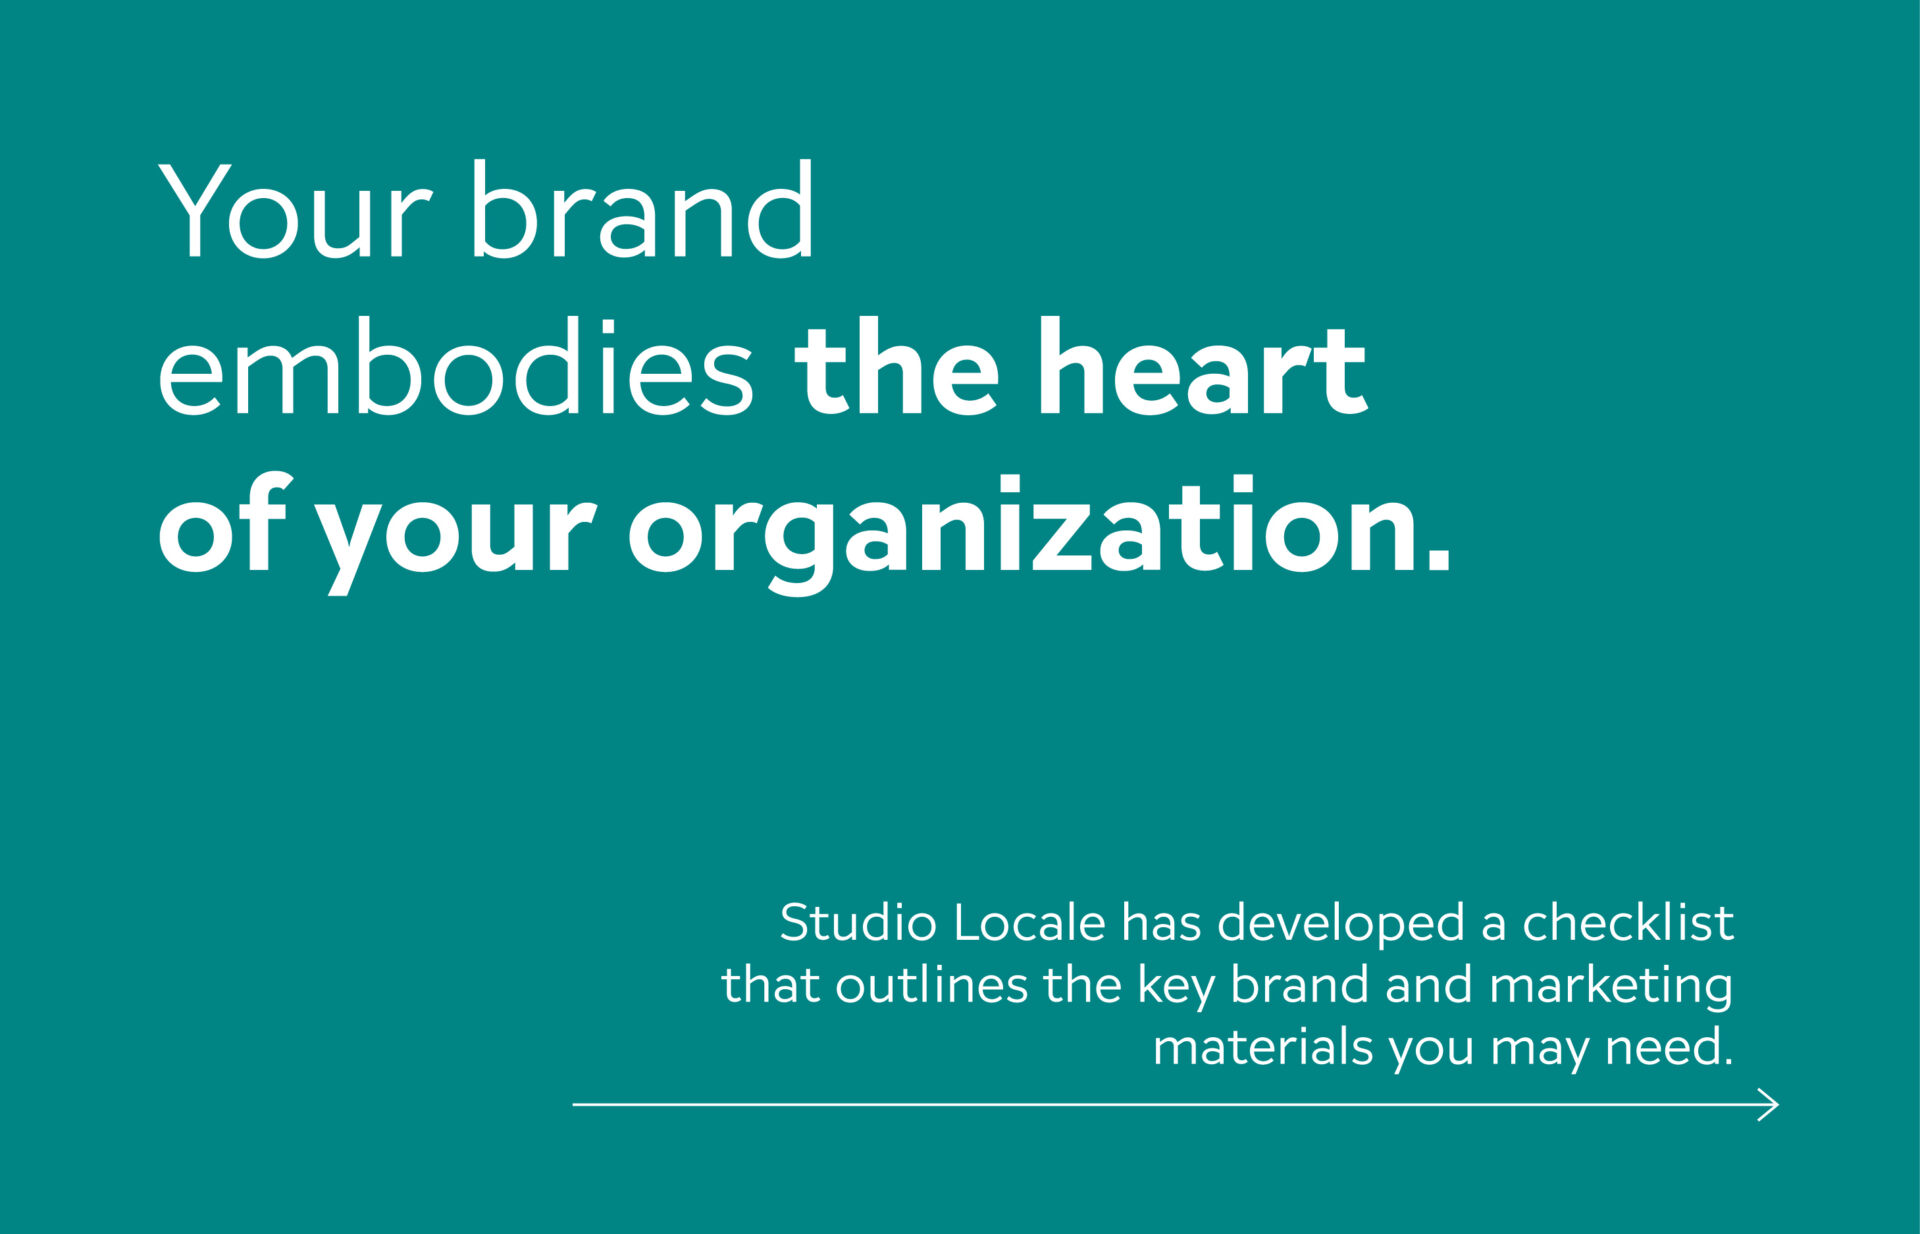 Your brand embodies the heart of your organization